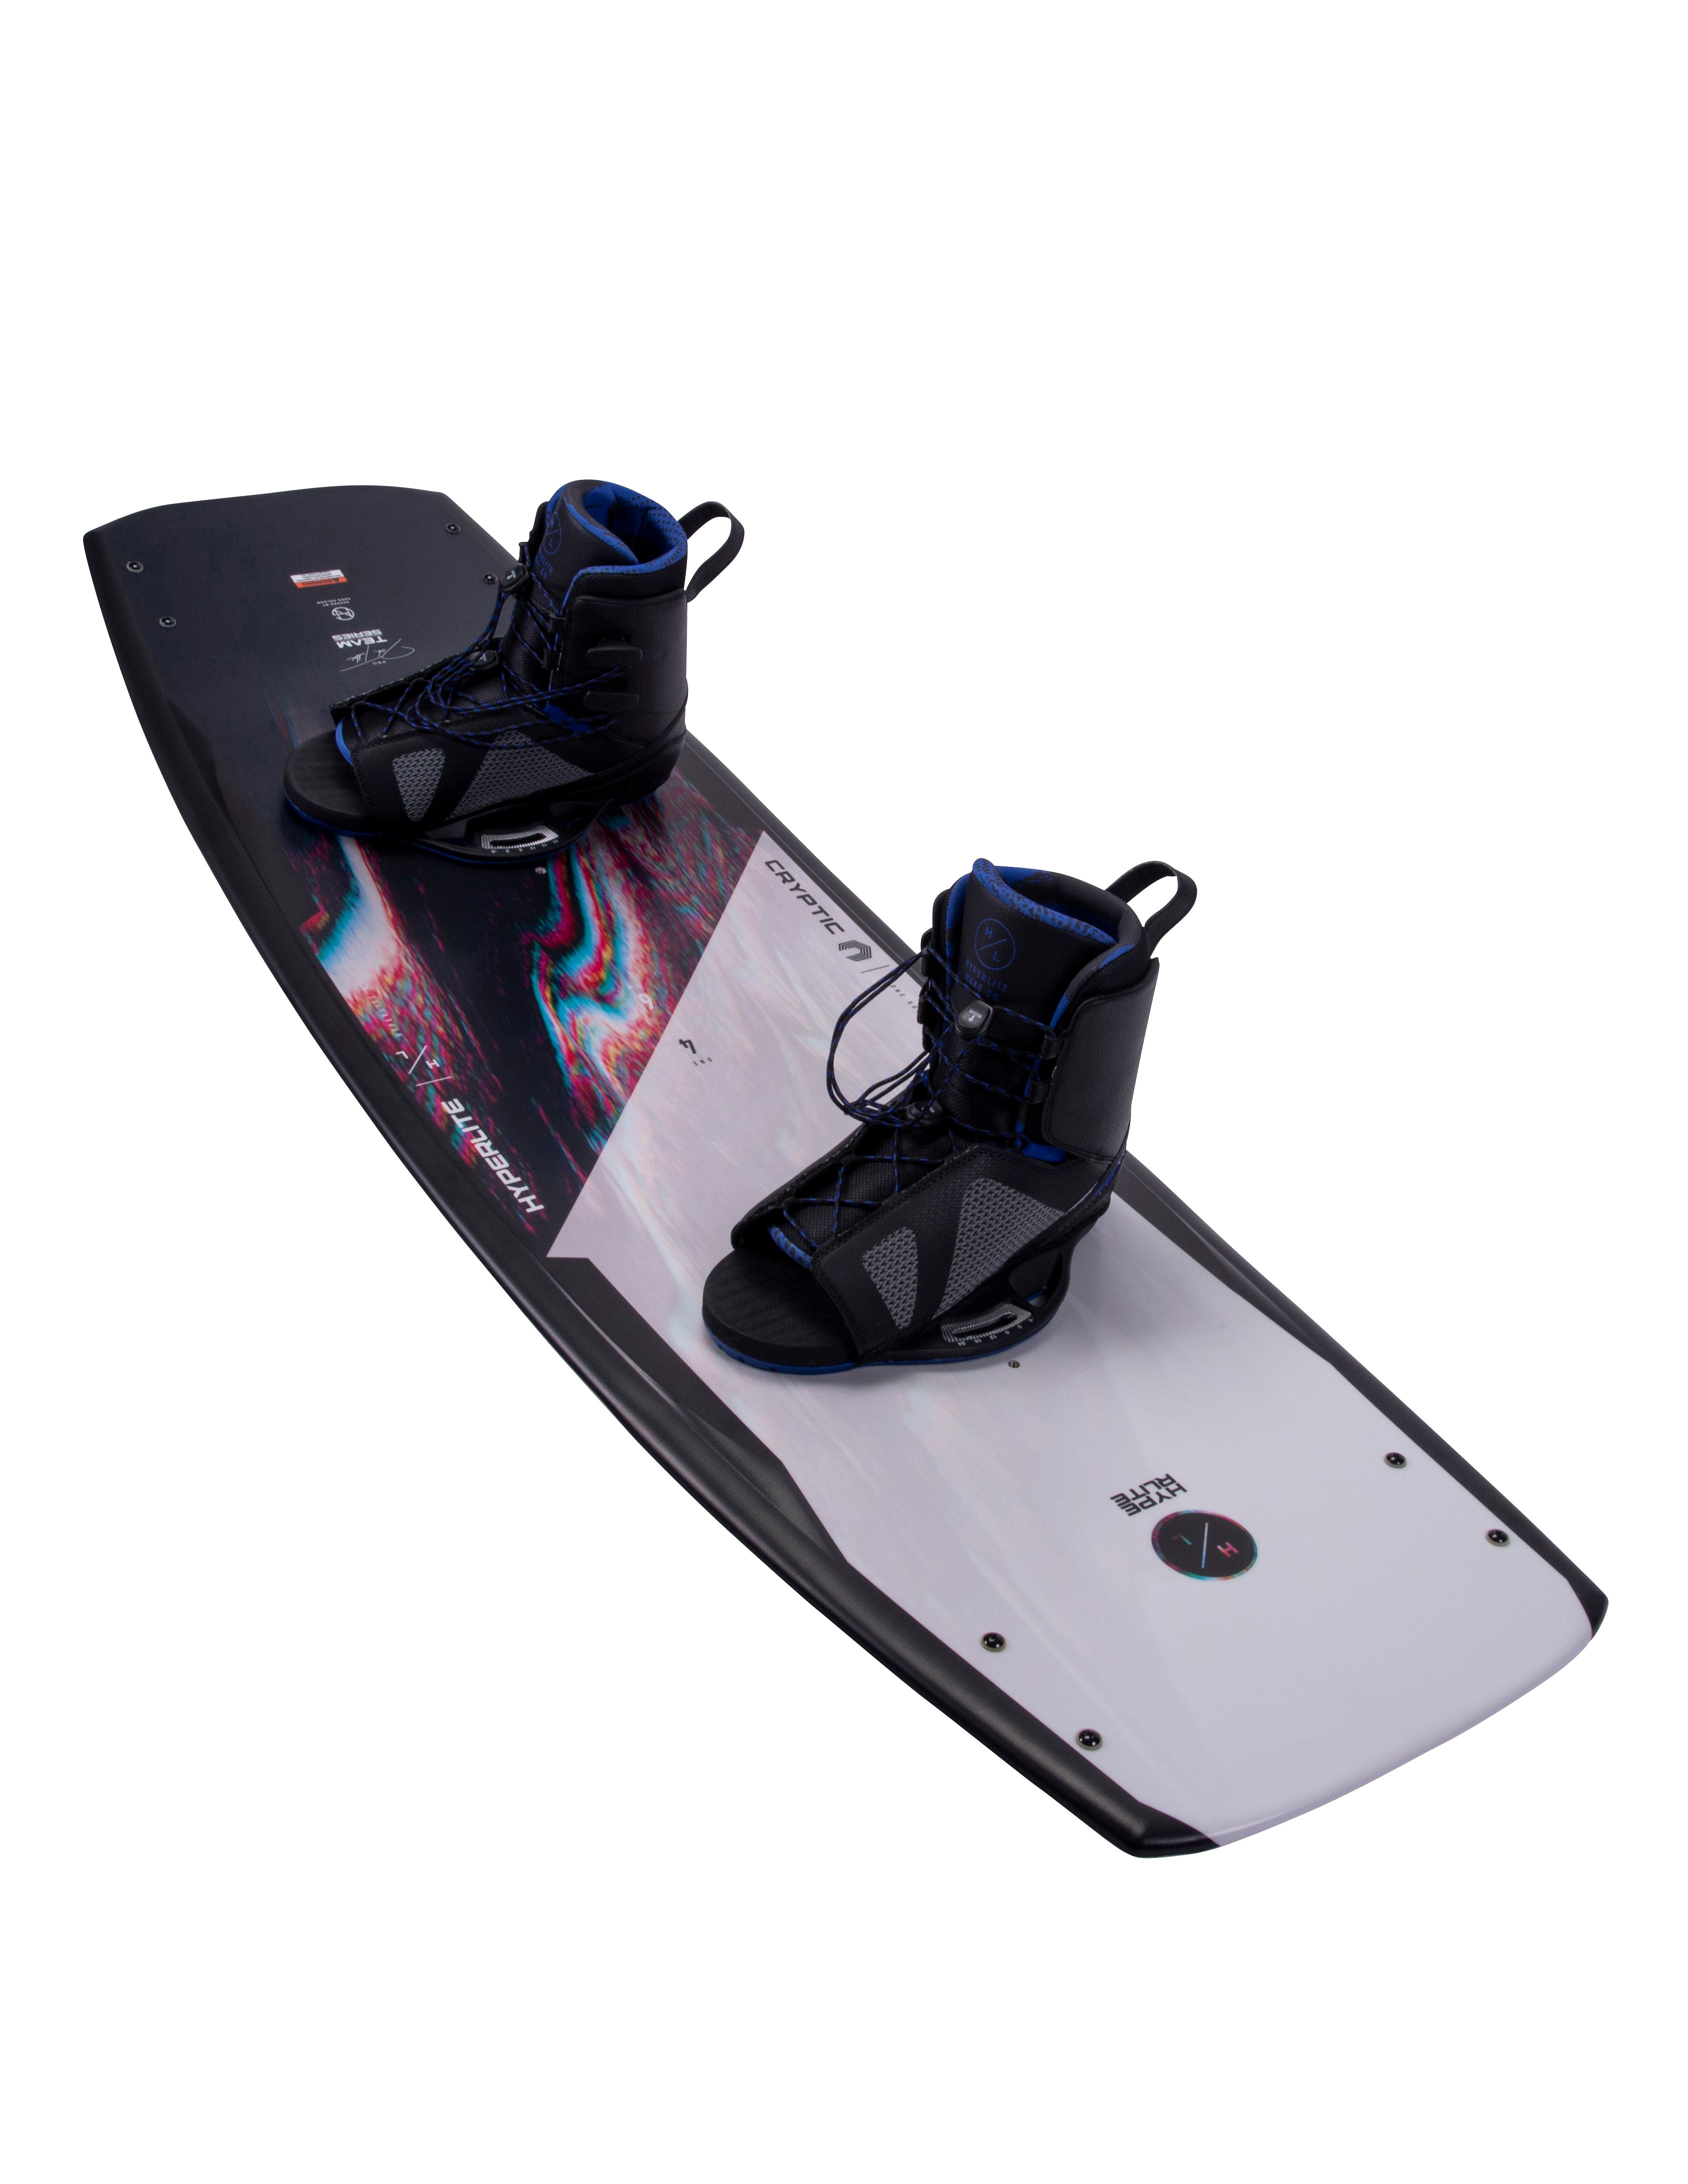 2022 HYPERLITE CRYPTIC WAKEBOARD 138 w/TEAM OT (7-10) BOOTS